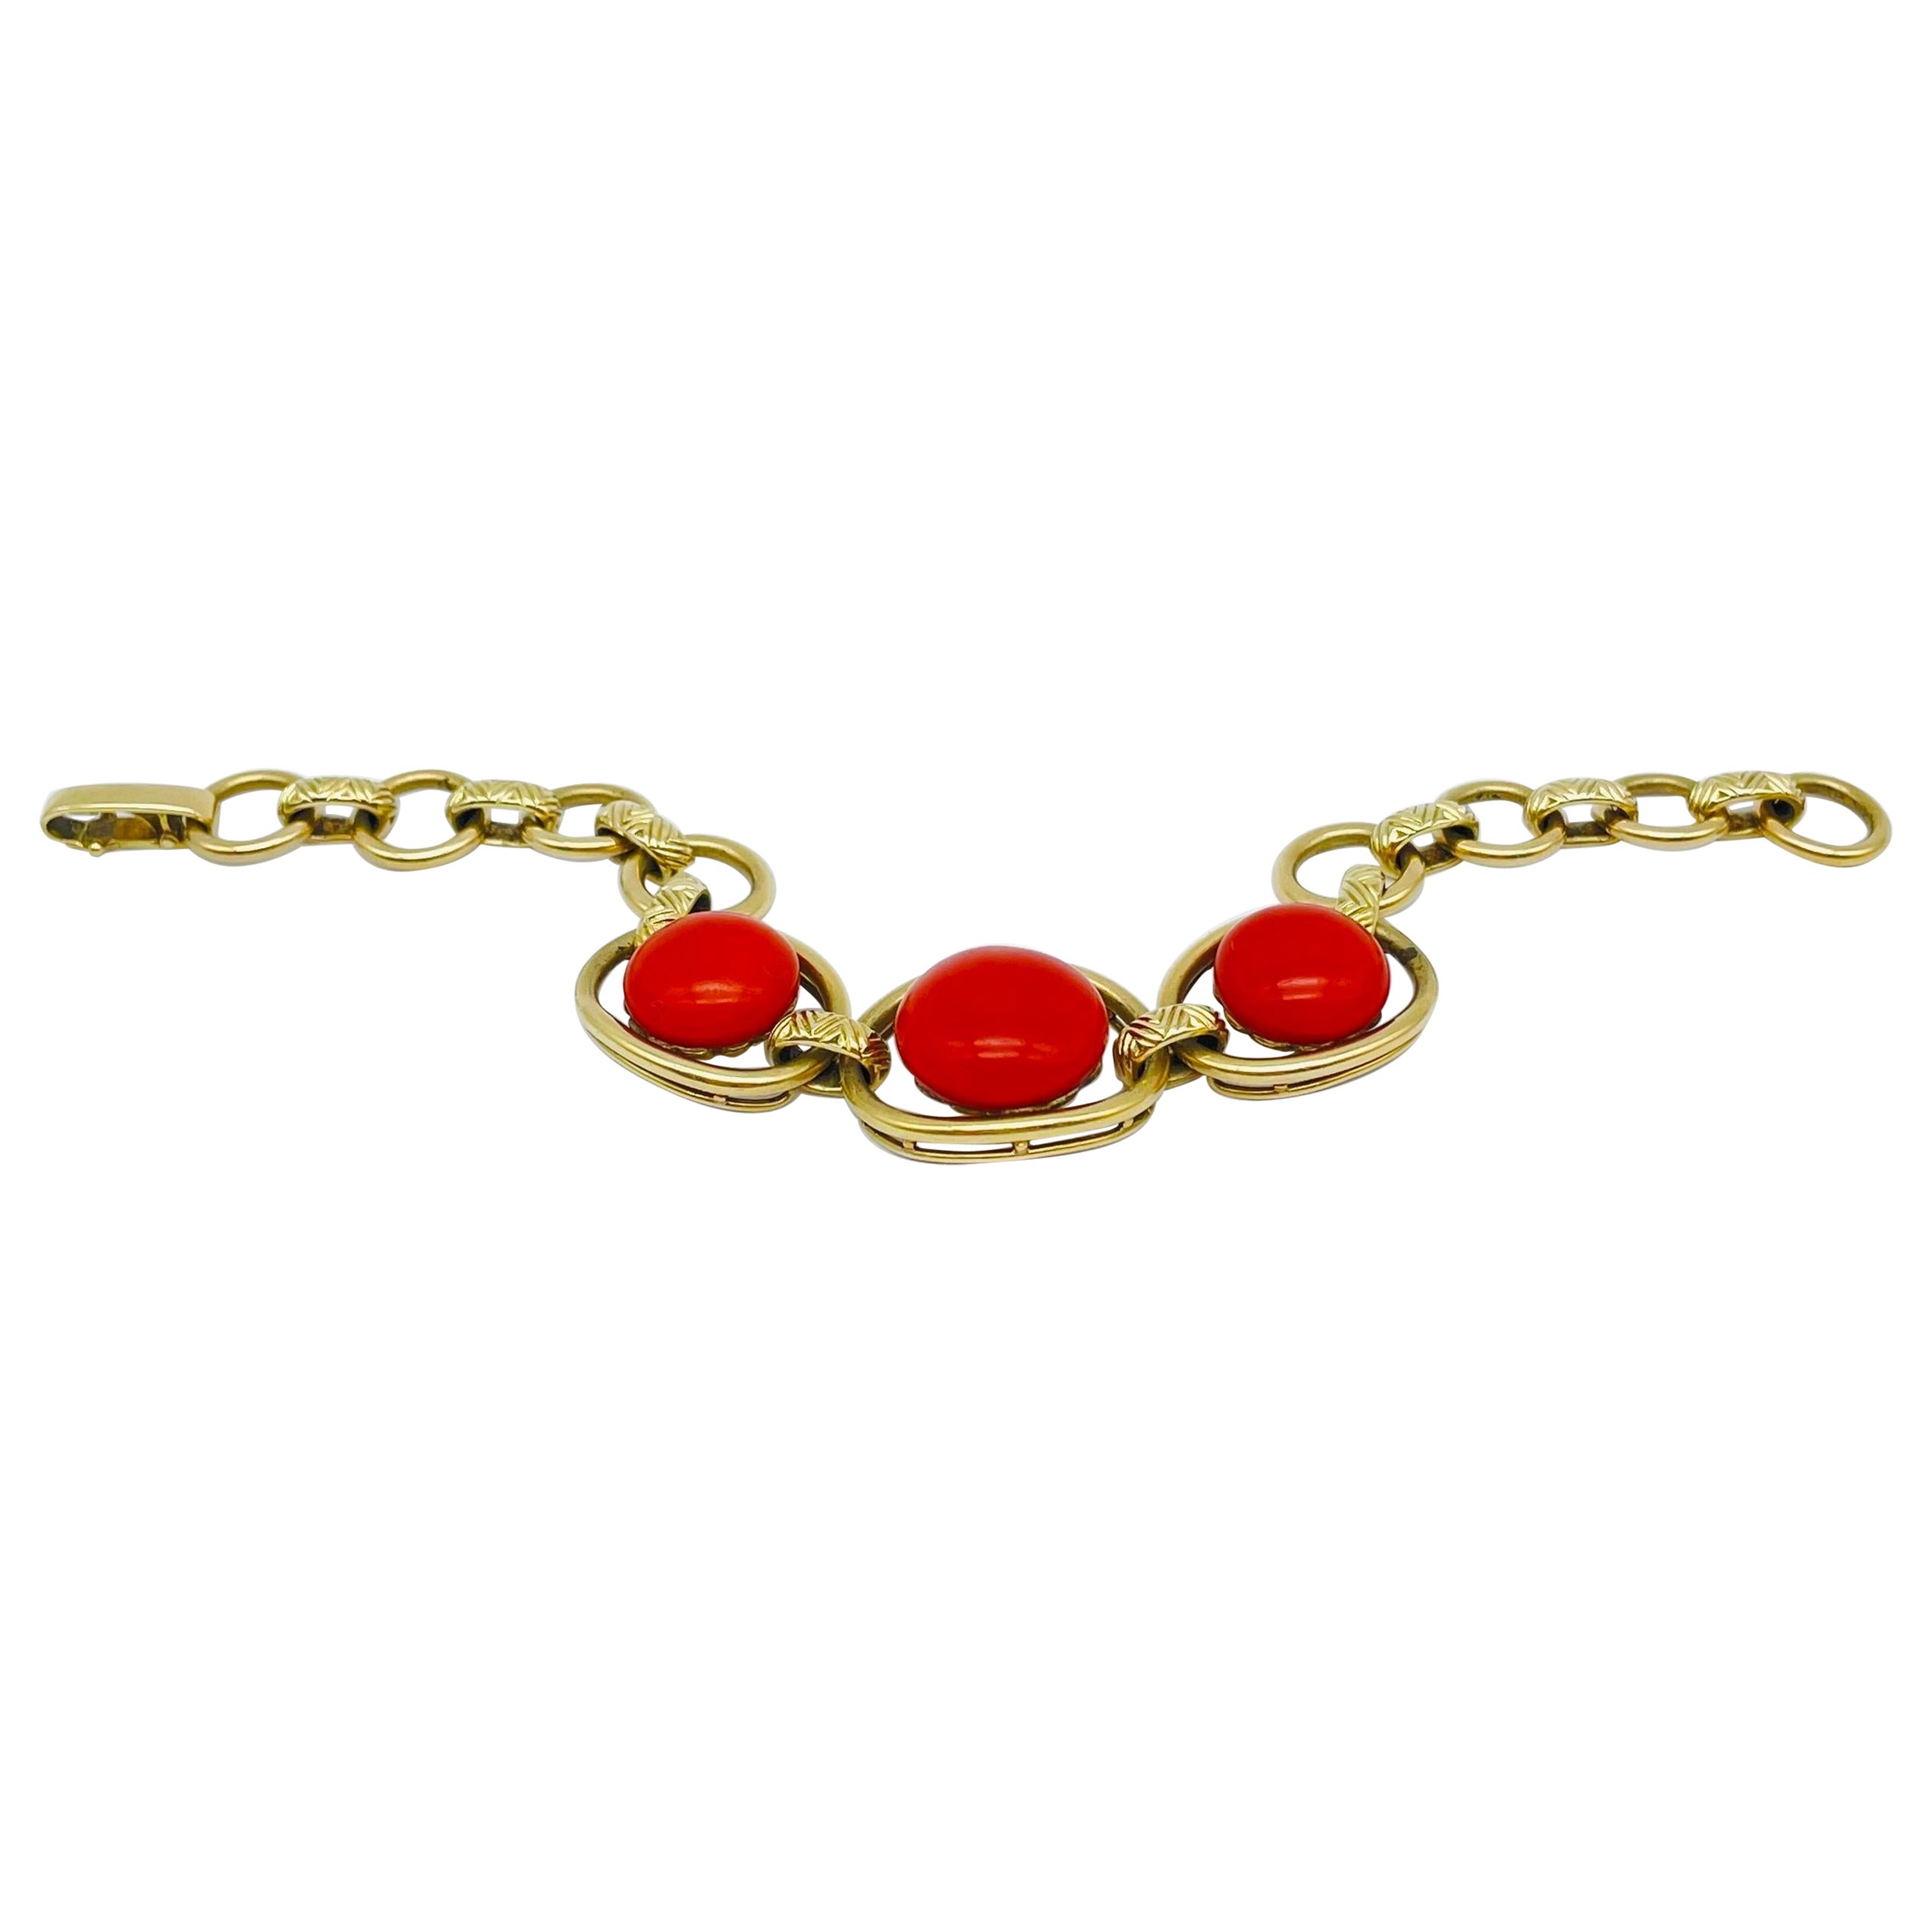 Exceptional Bracelet 14k Gold Link Chain Red Coral For Sale